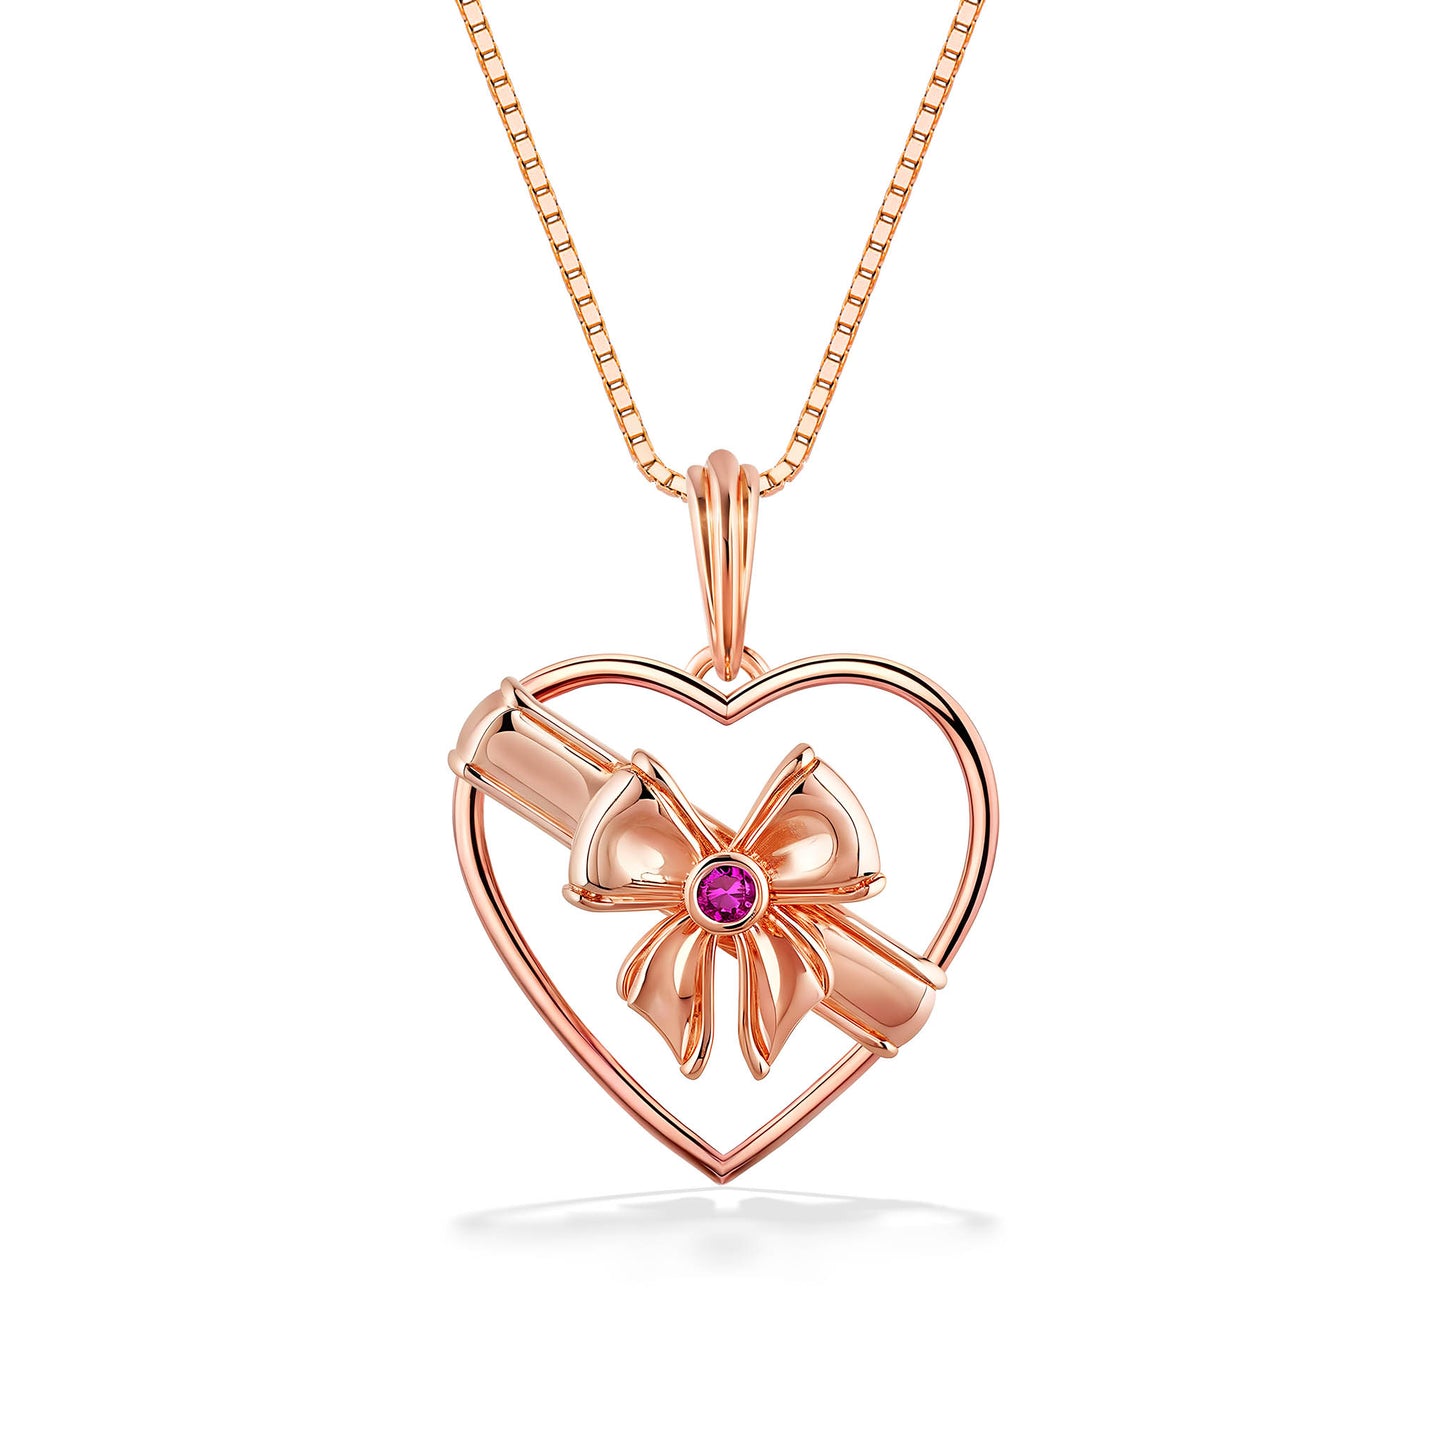 44871 - 14K Rose Gold - Box of Chocolate Heart Pendant with Pink Sapphire